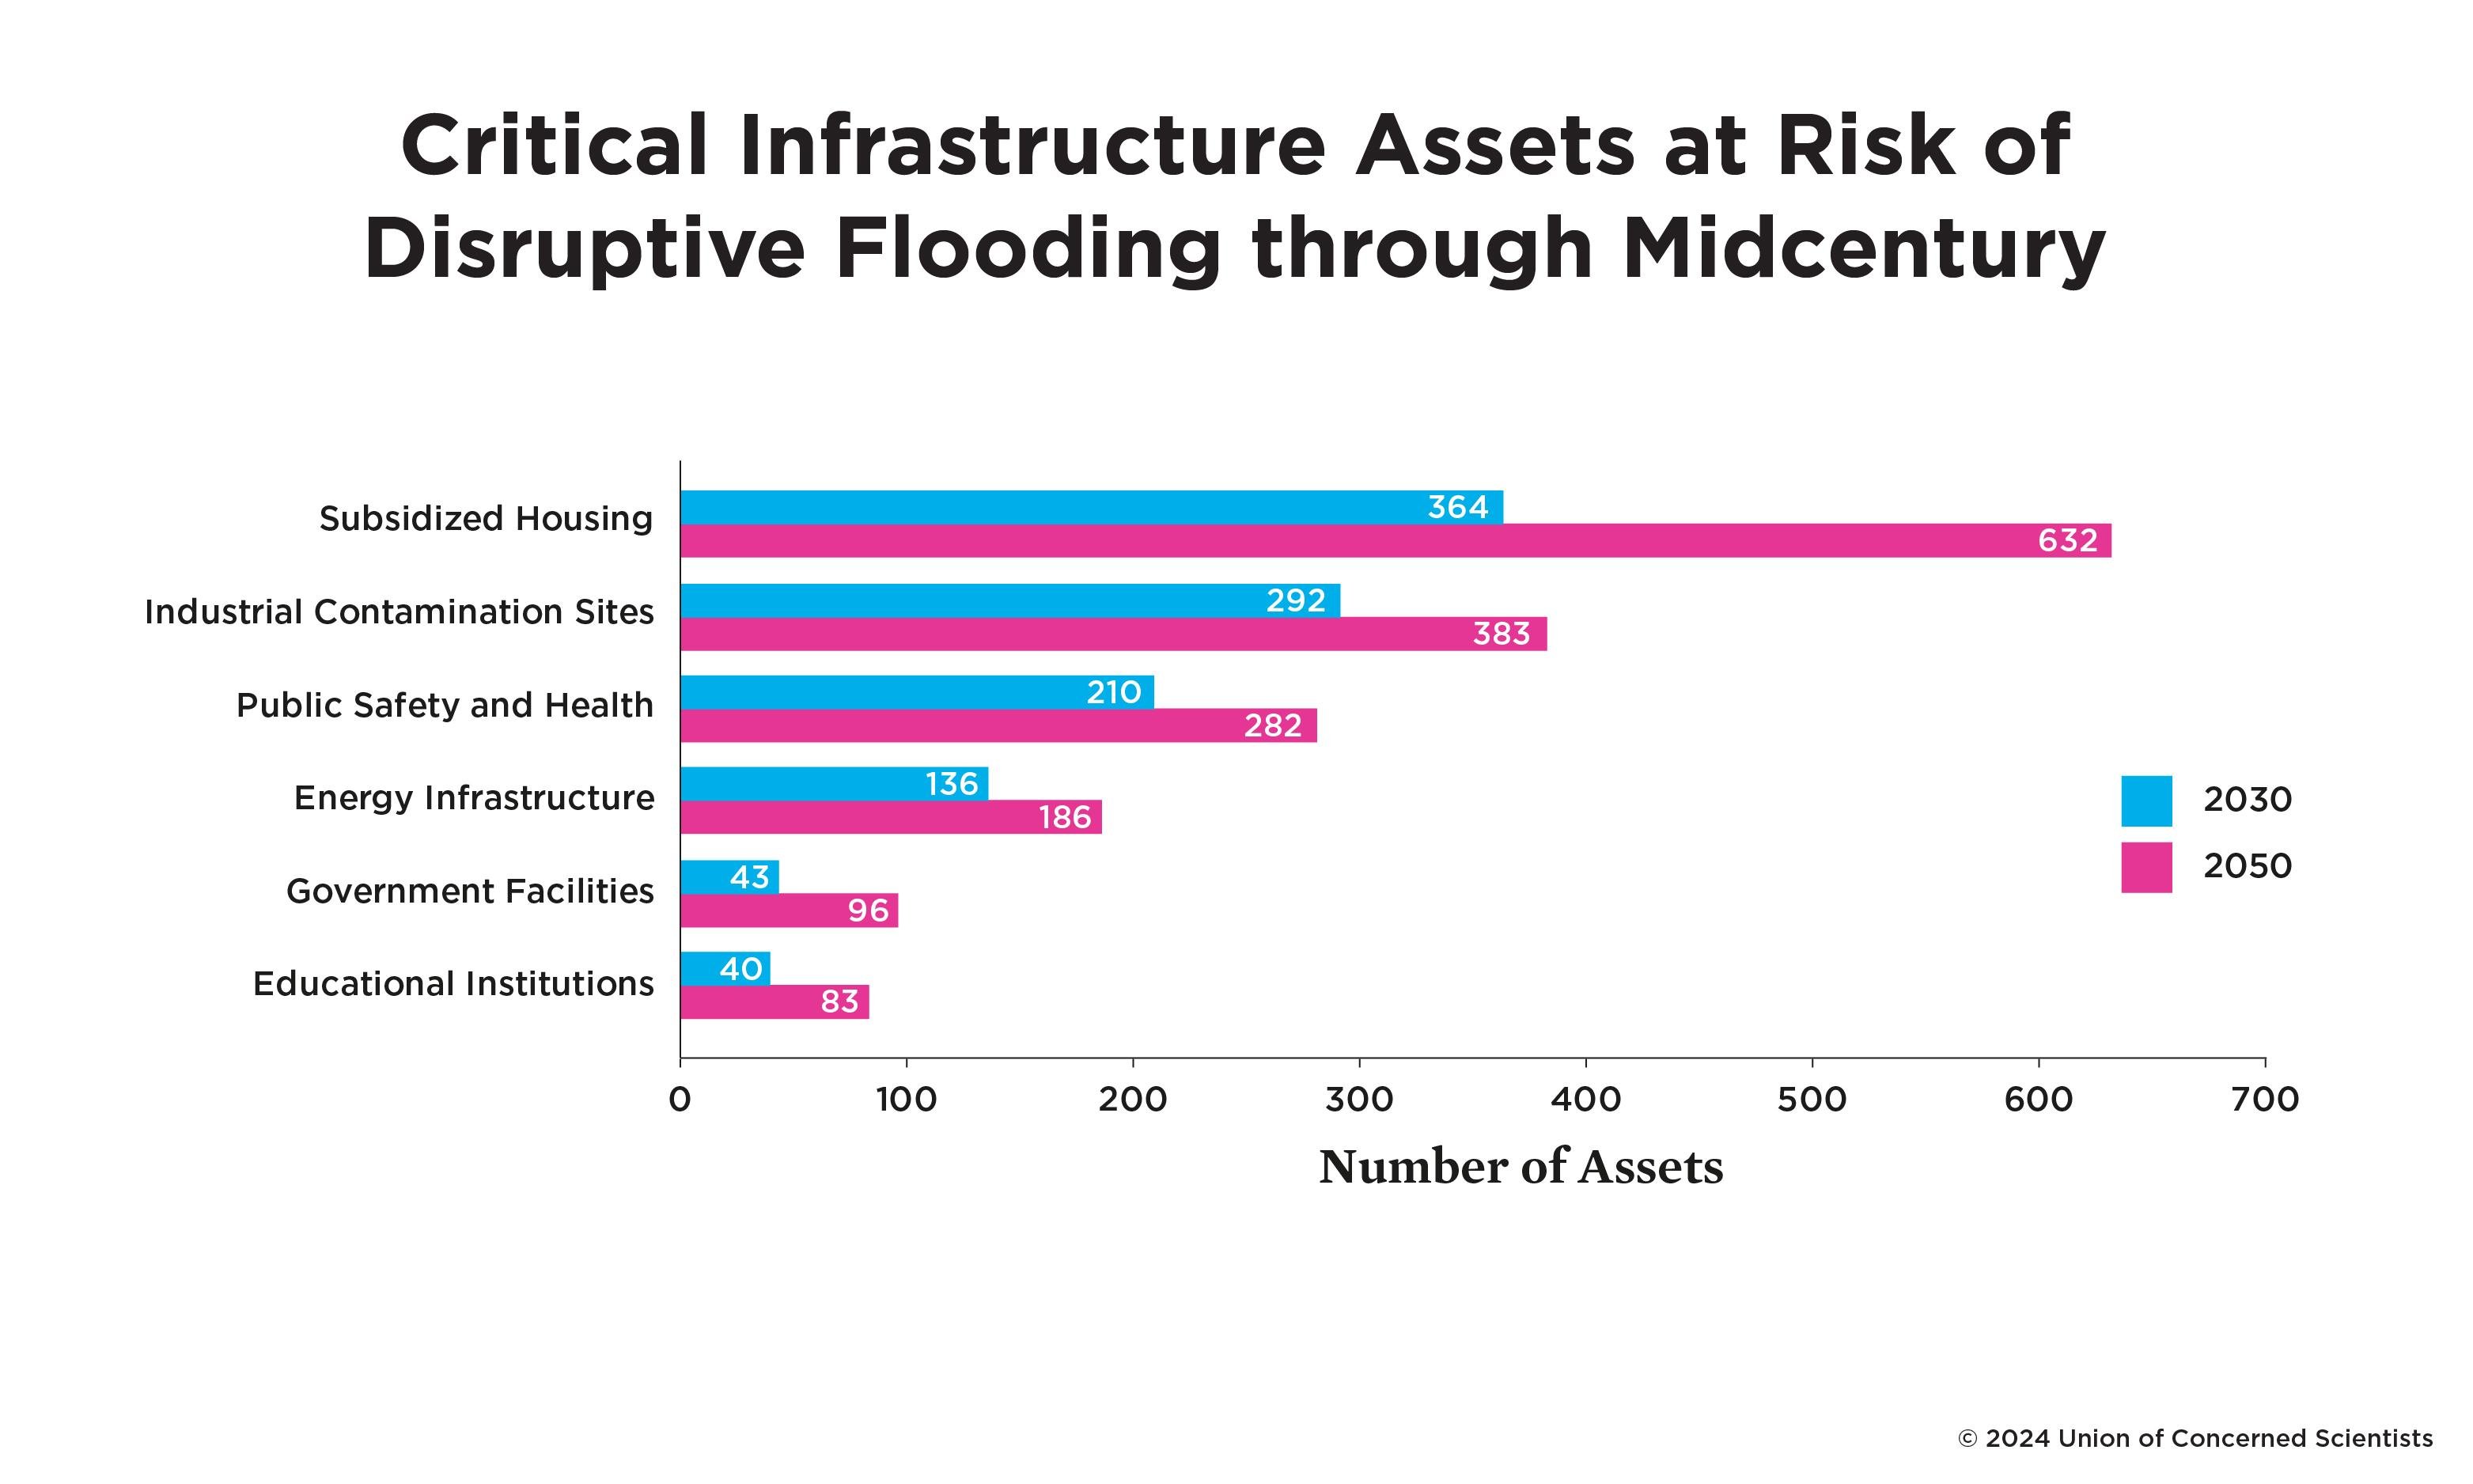 Bar chart of critical infrastructure assets at risk of flooding